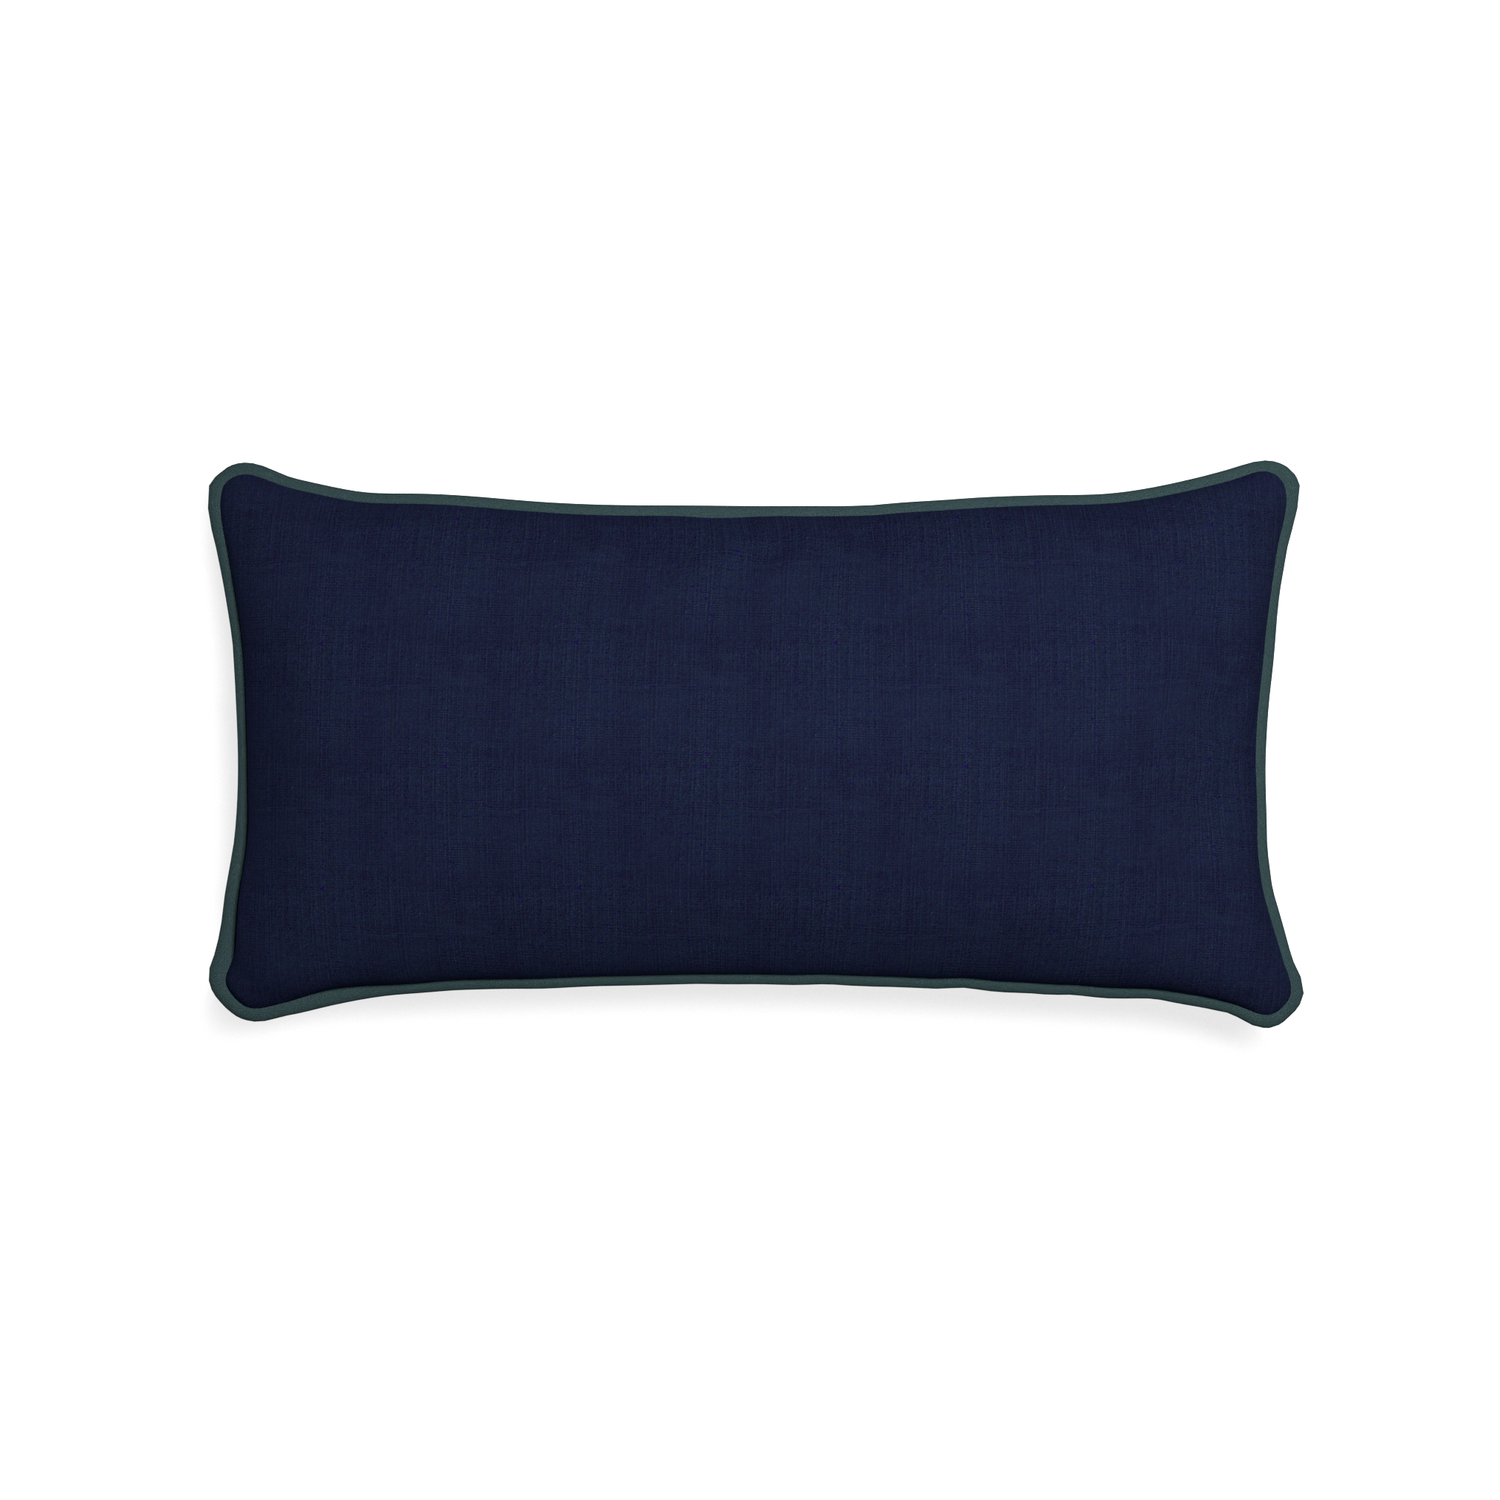 Midi-lumbar midnight custom navy bluepillow with p piping on white background